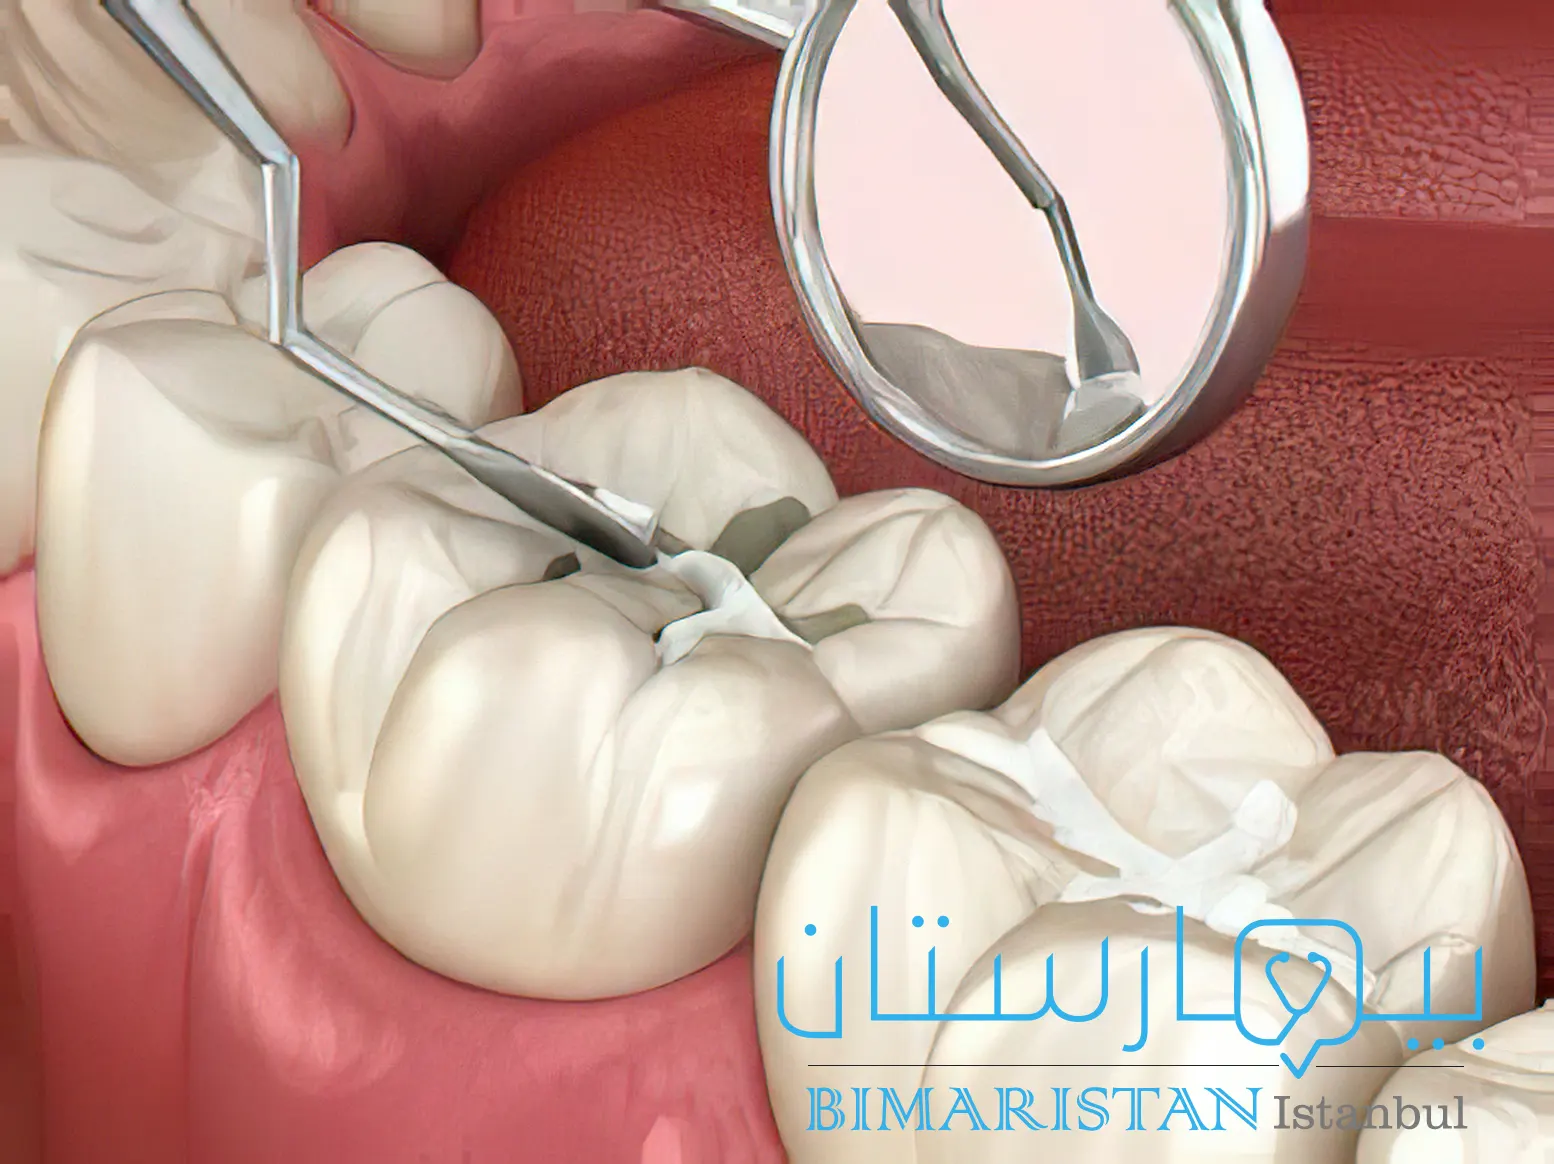 The application of the plain substance within the mouthpieces for the prevention of caries